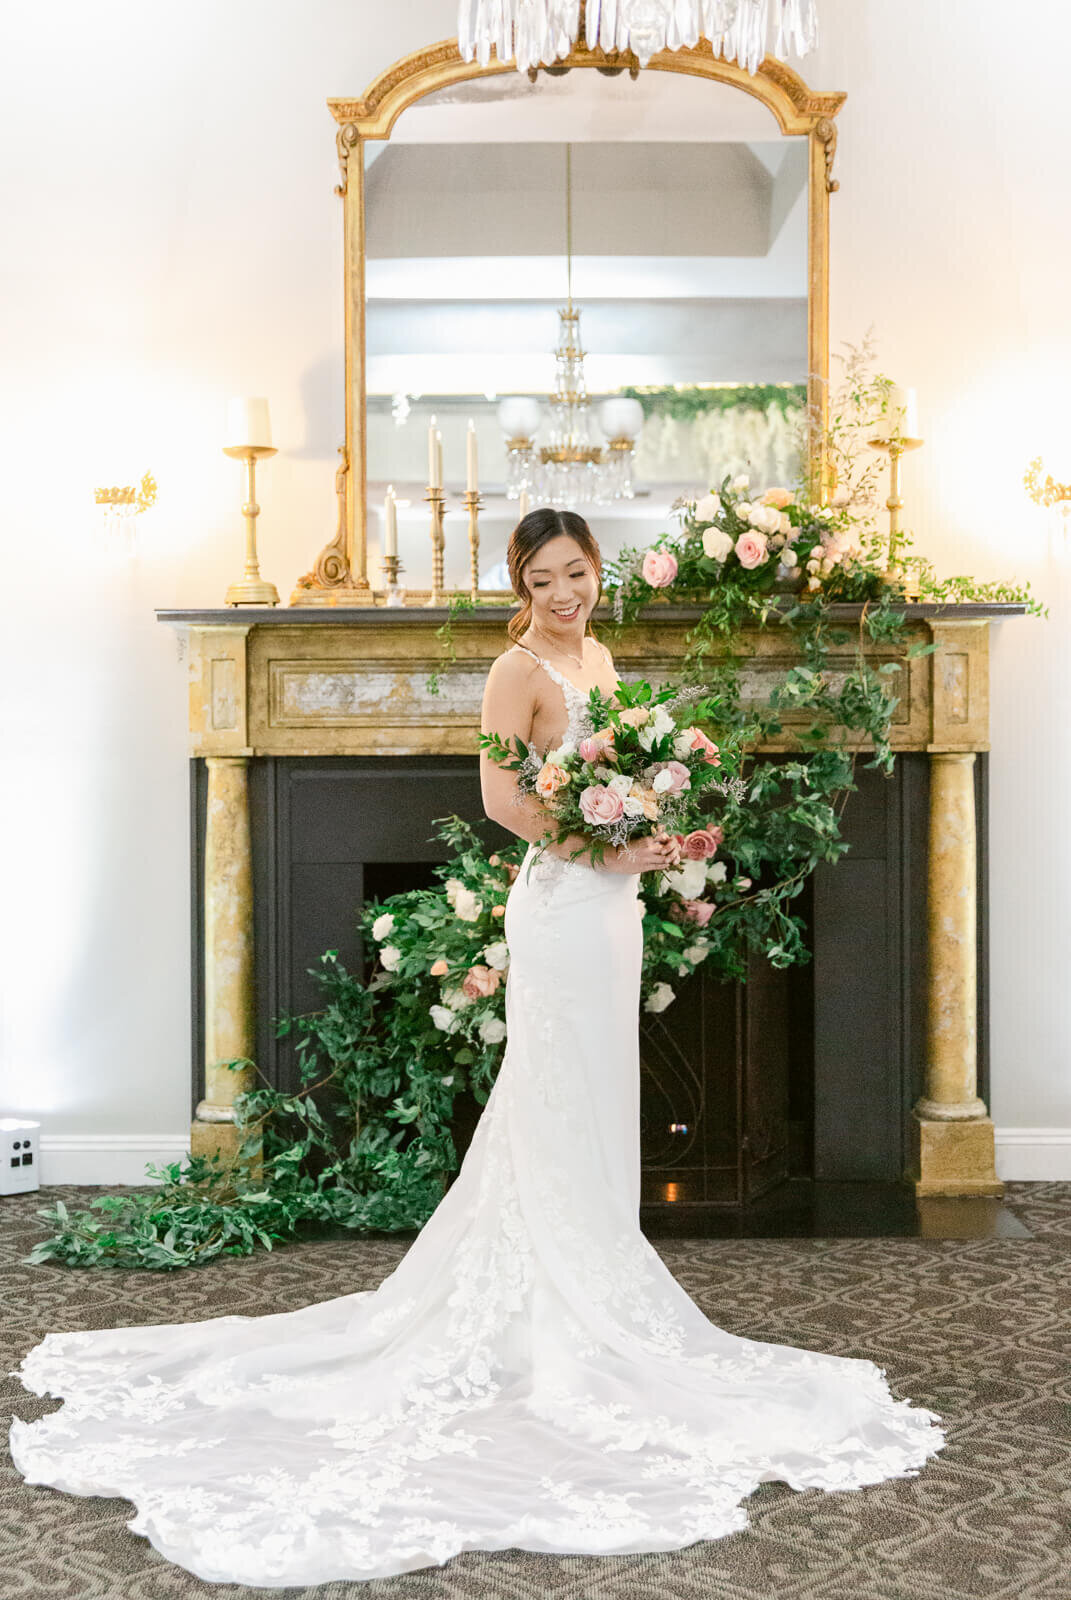 Formal bridal portrait taken in front of the fireplace at Ceresville Mansion Mansion in Frederick, Maryland. Captured by Bethany Aubre Photography.